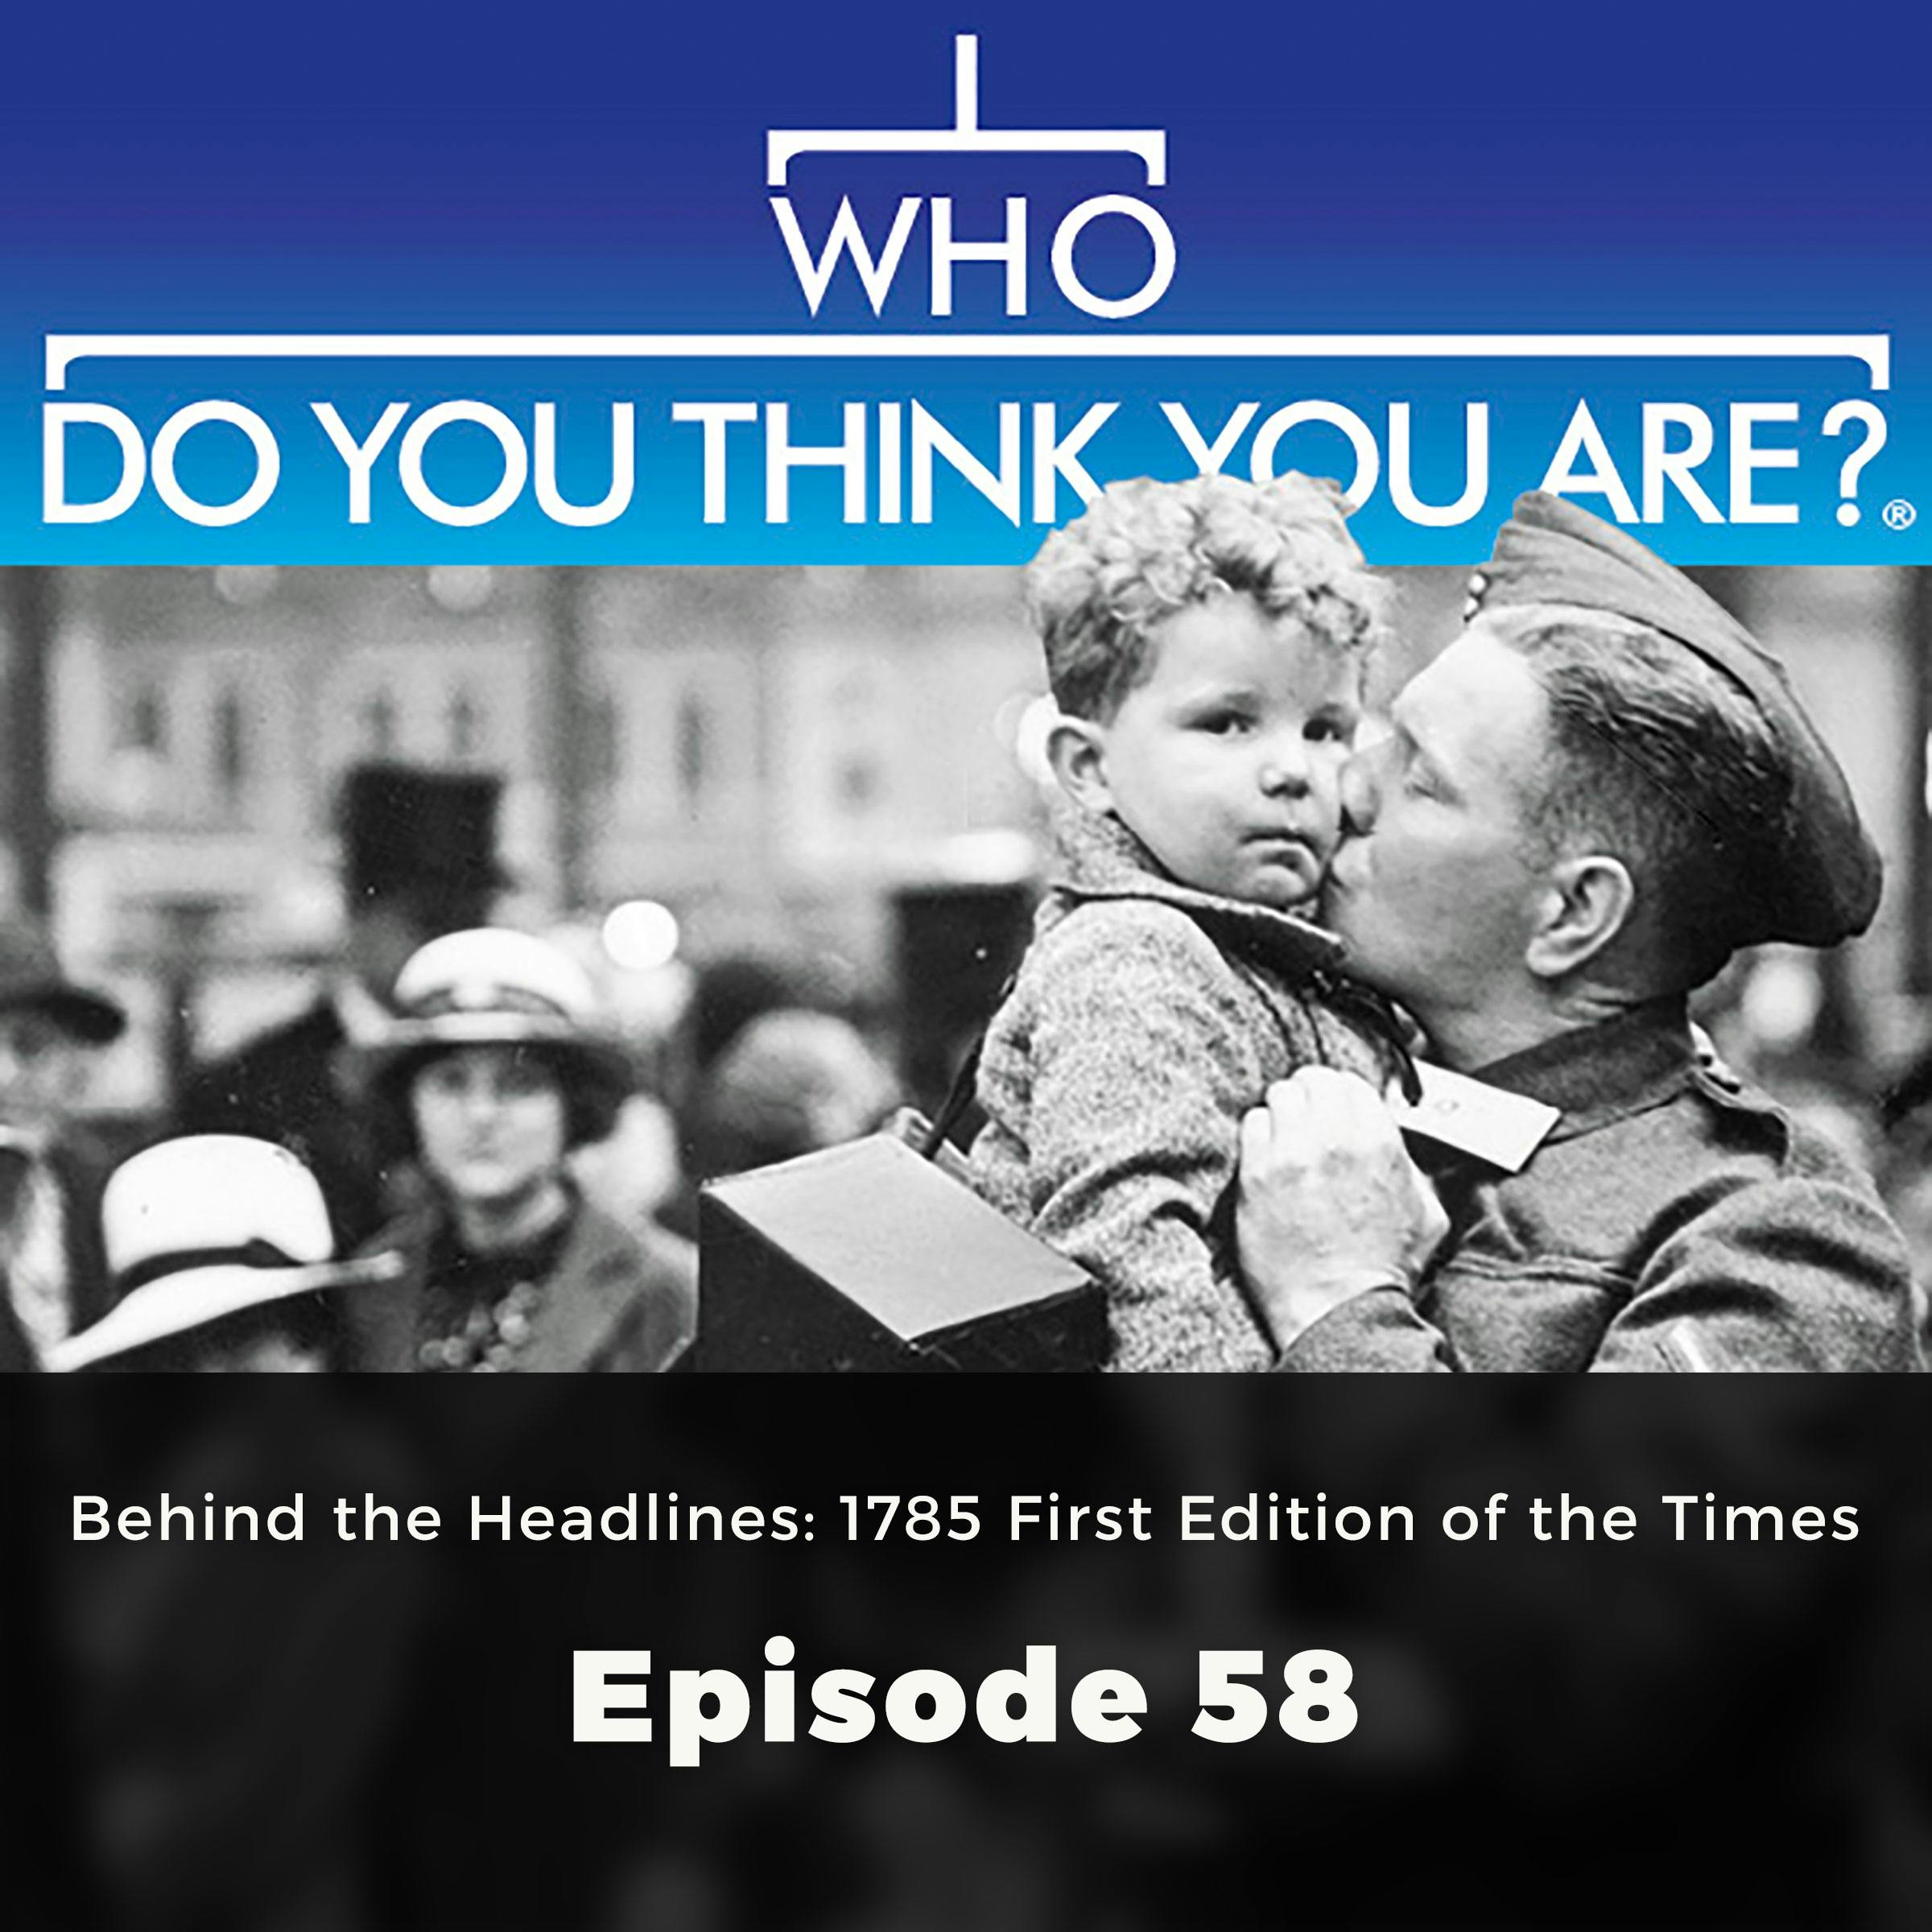 Who Do You Think You Are? Behind the Headlines: 1785 First Edition of the Times: Episode 58 - undefined